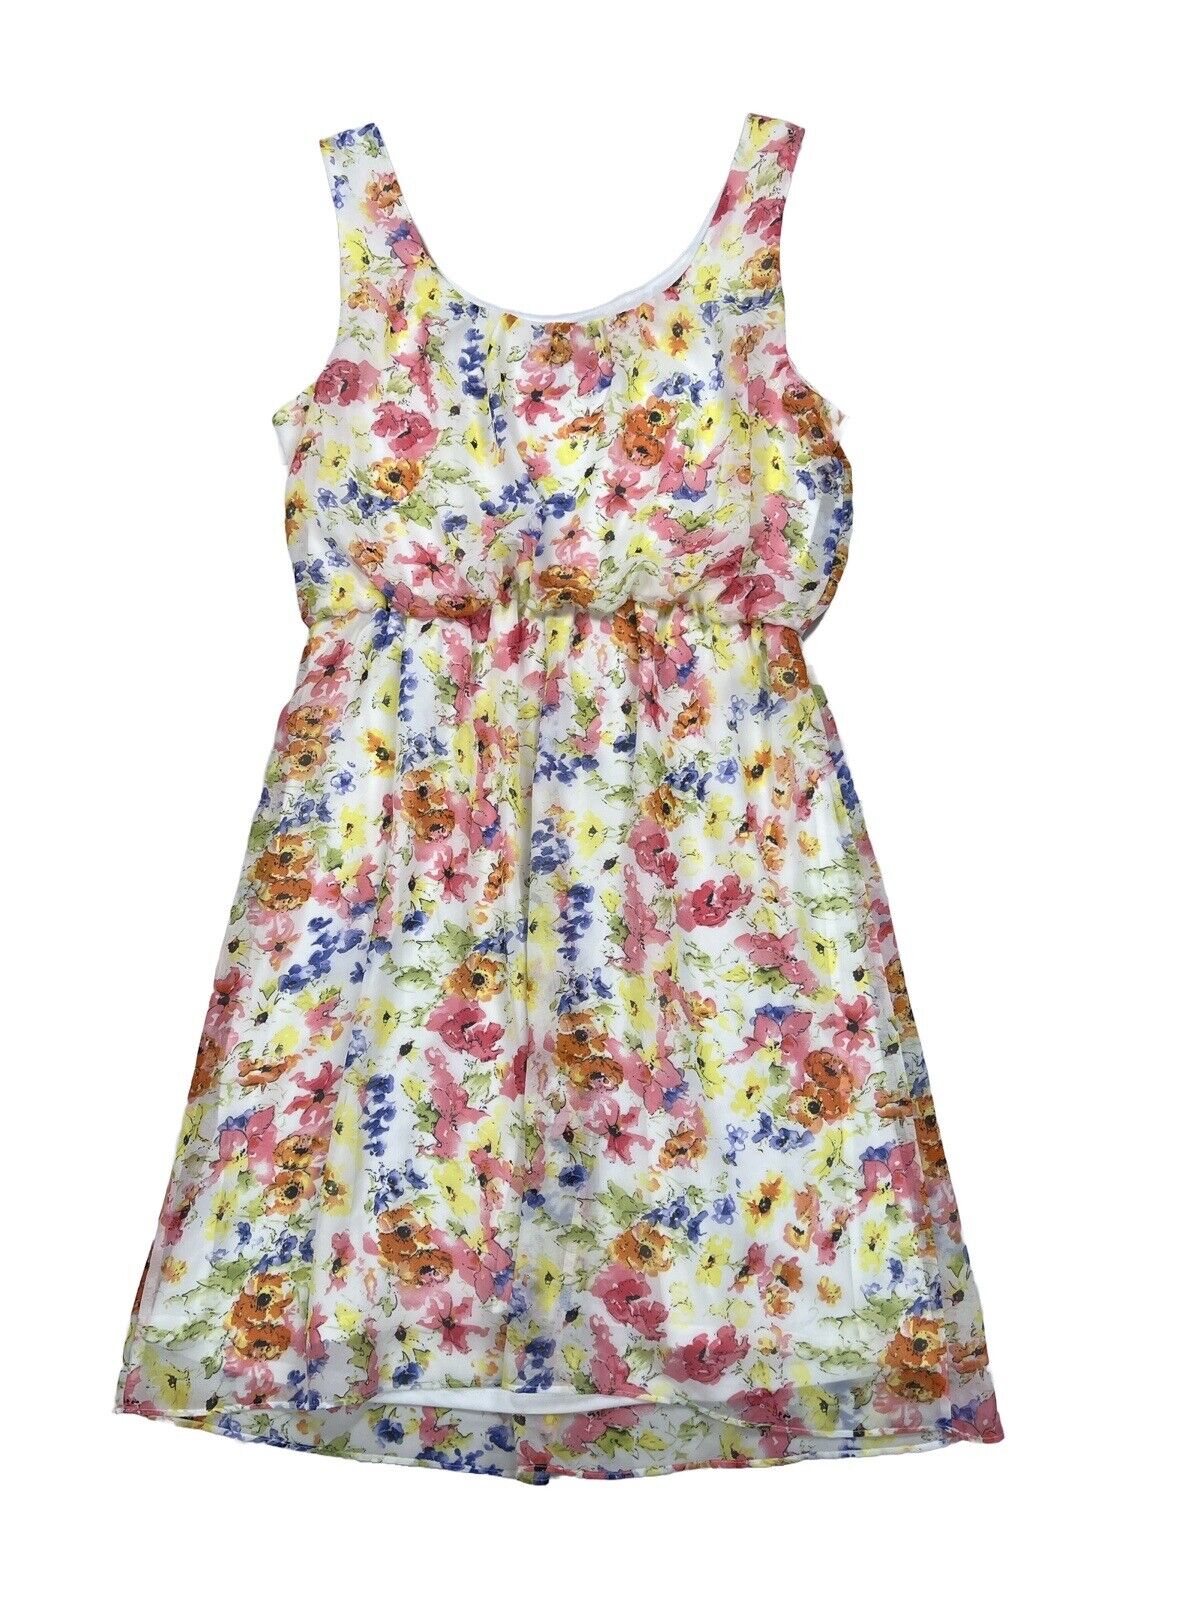 AGB Women's Multi-Color Floral Sheer Lined Sundress - 12